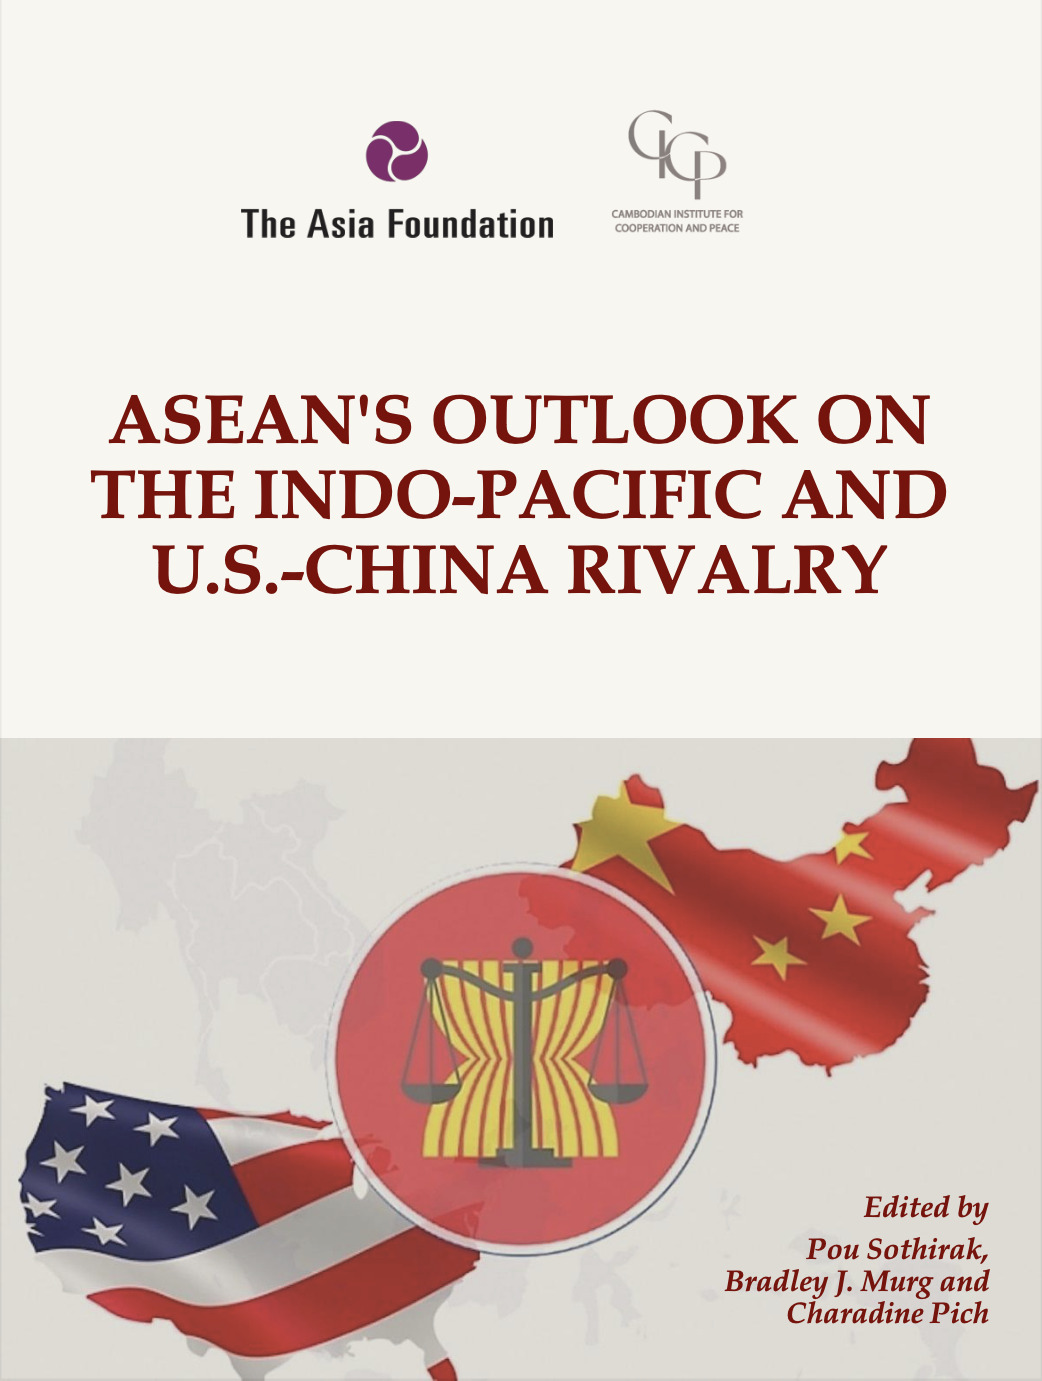 ASEAN'S OUTLOOK ON THE INDO-PACIFIC AND U.S.-CHINA RIVALRY-